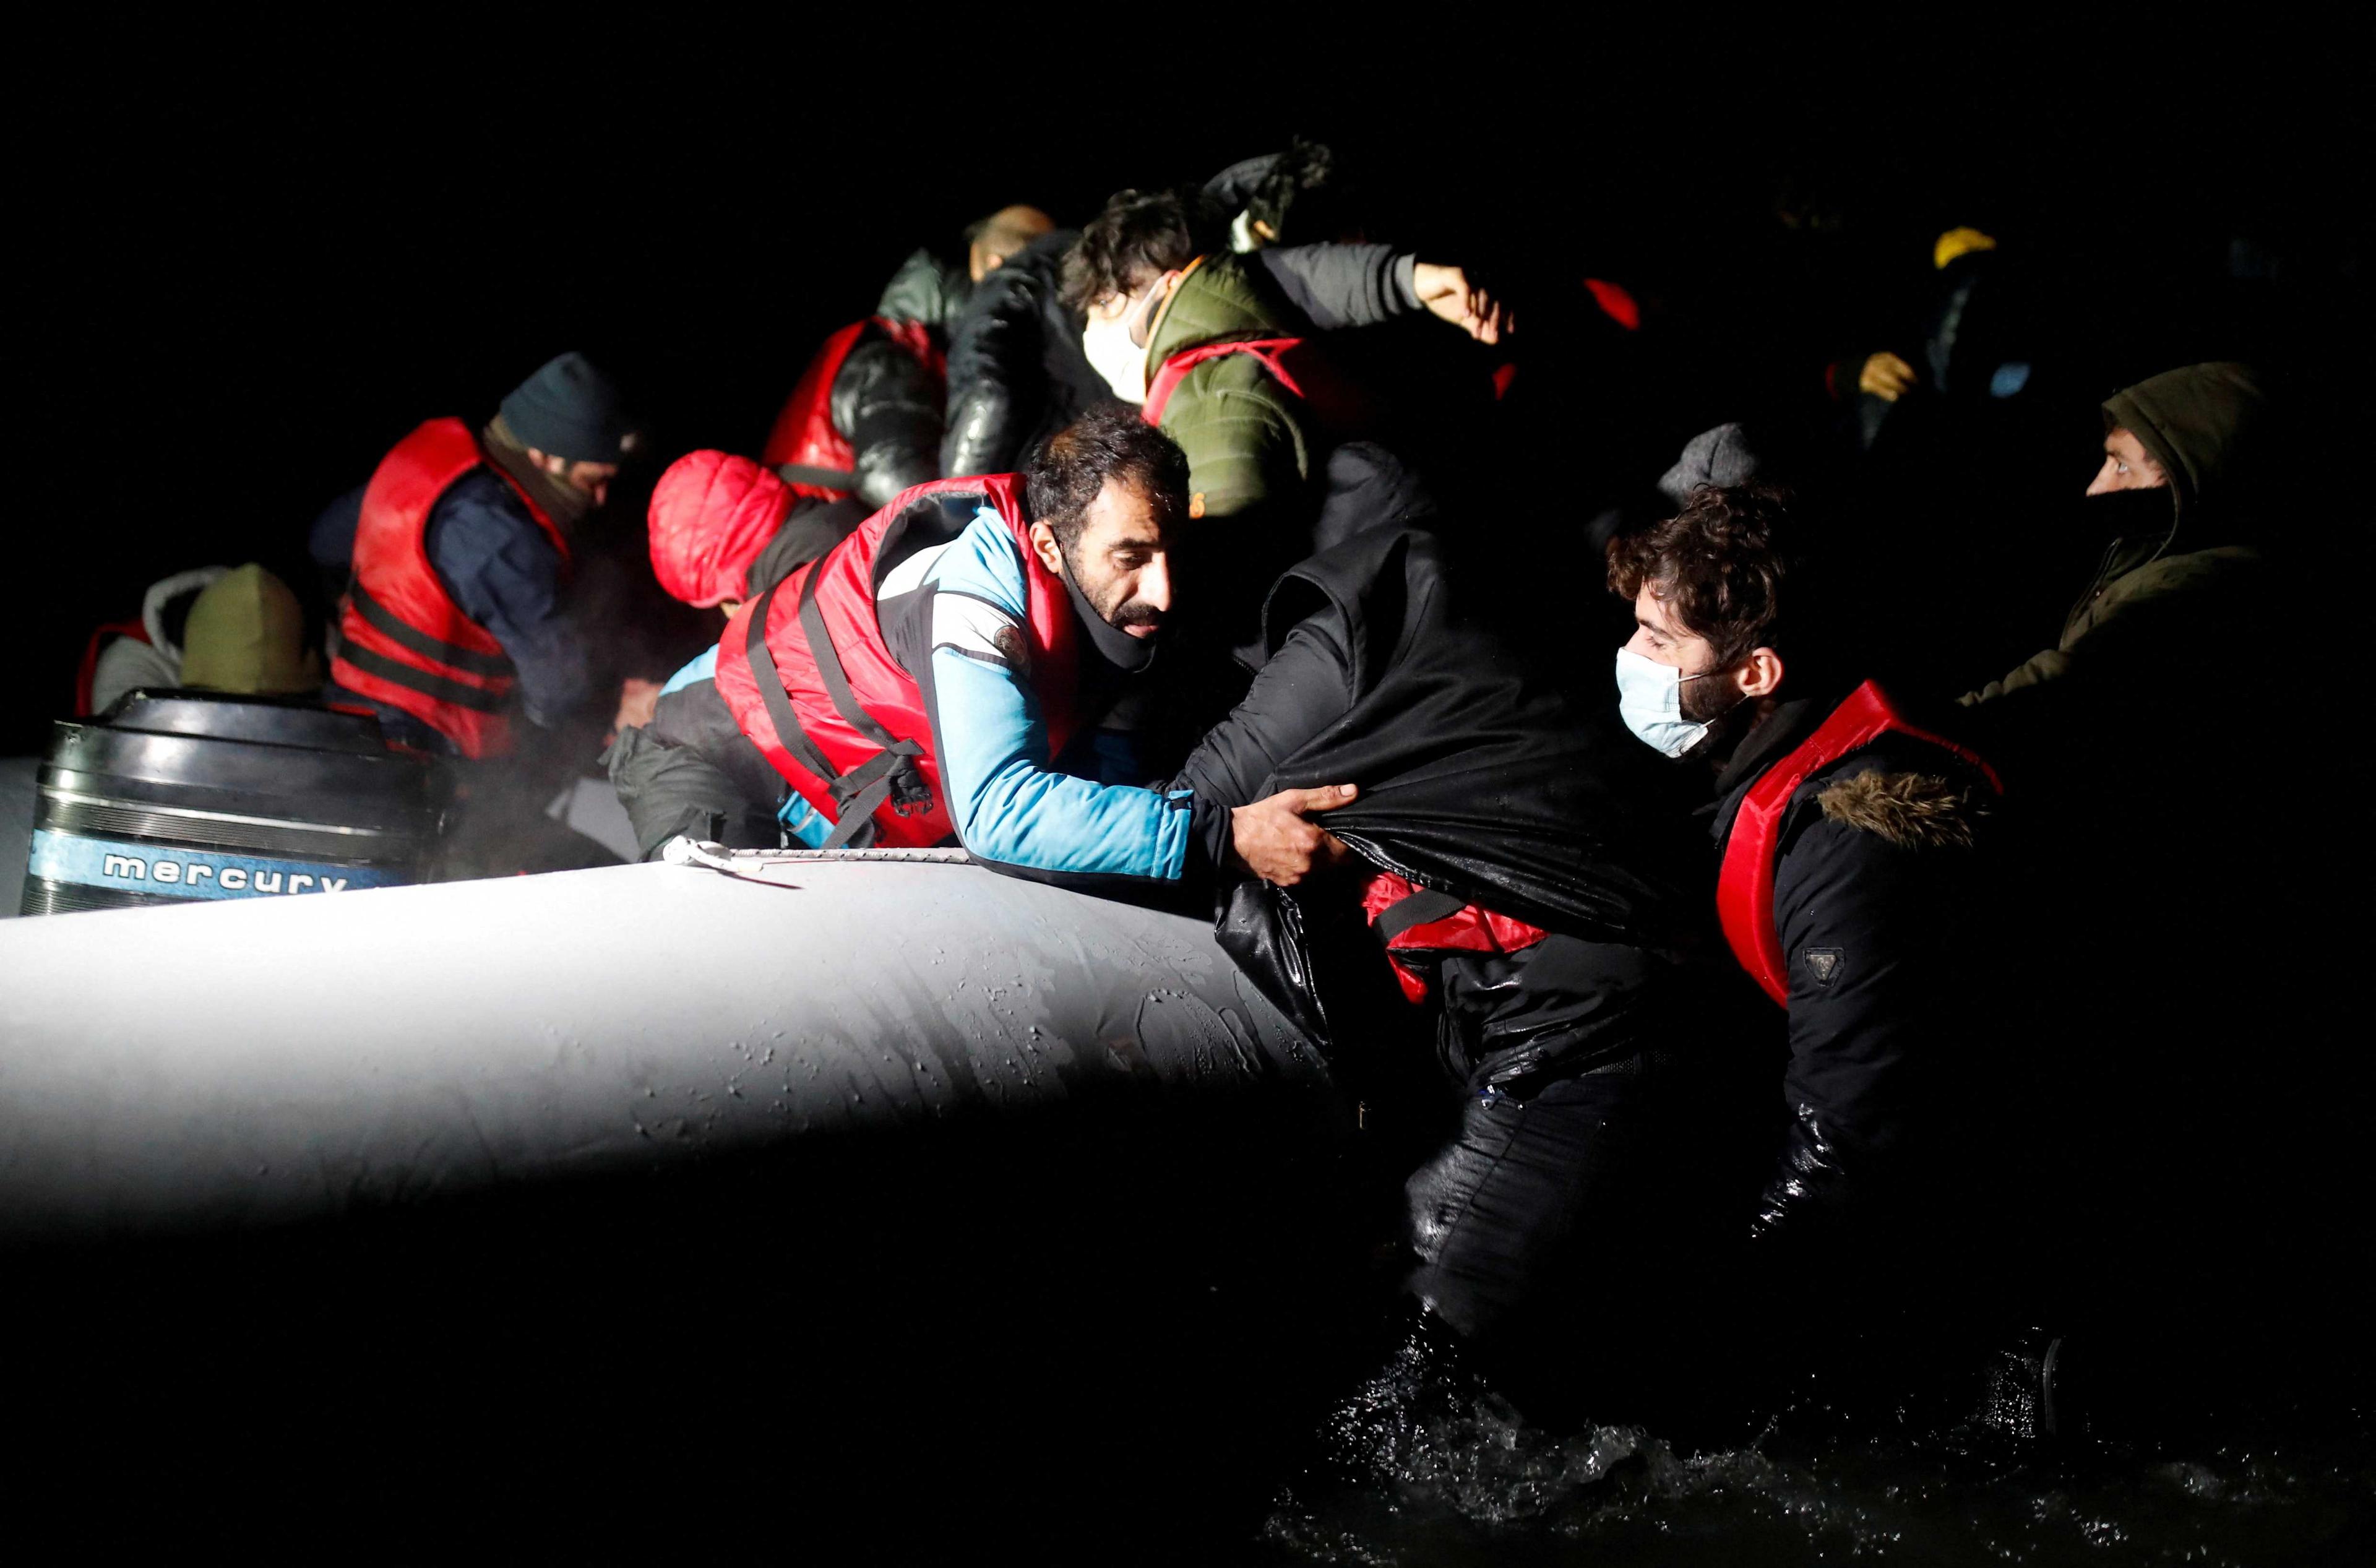 Migrants get on an inflatable dinghy as they leave to cross the English Channel, in Wimereux near Calais, France, Dec 16, 2021. Photo: Reuters